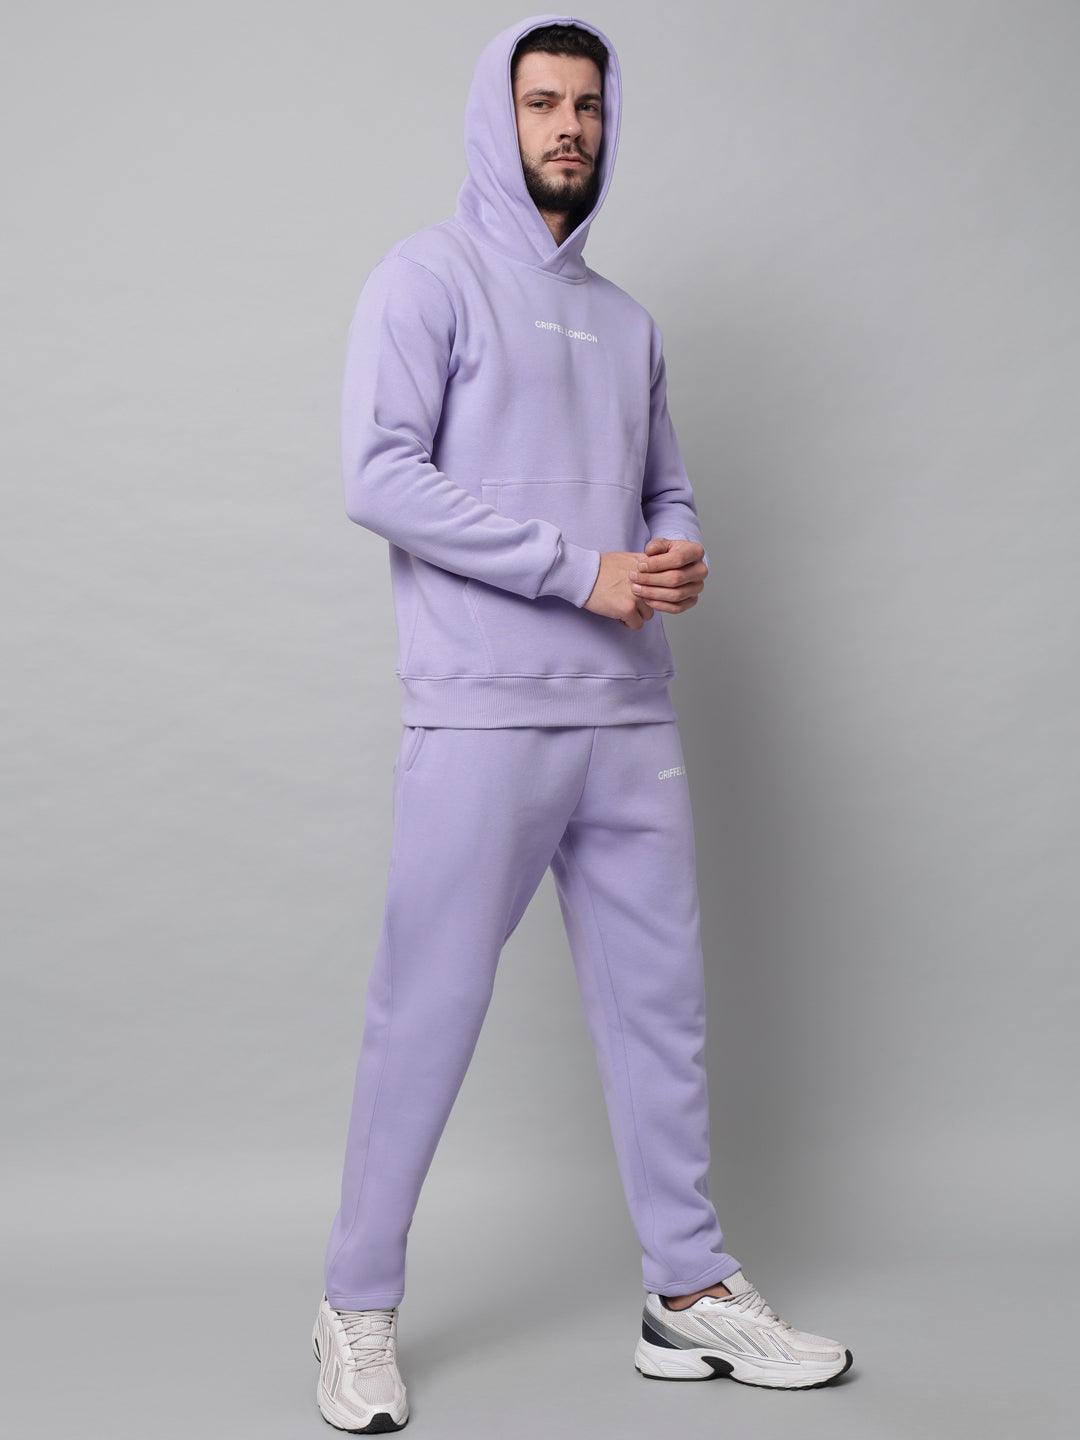 Griffel Men's Front Logo Solid Fleece Basic Hoodie and Joggers Full set Mauve Tracksuit - griffel